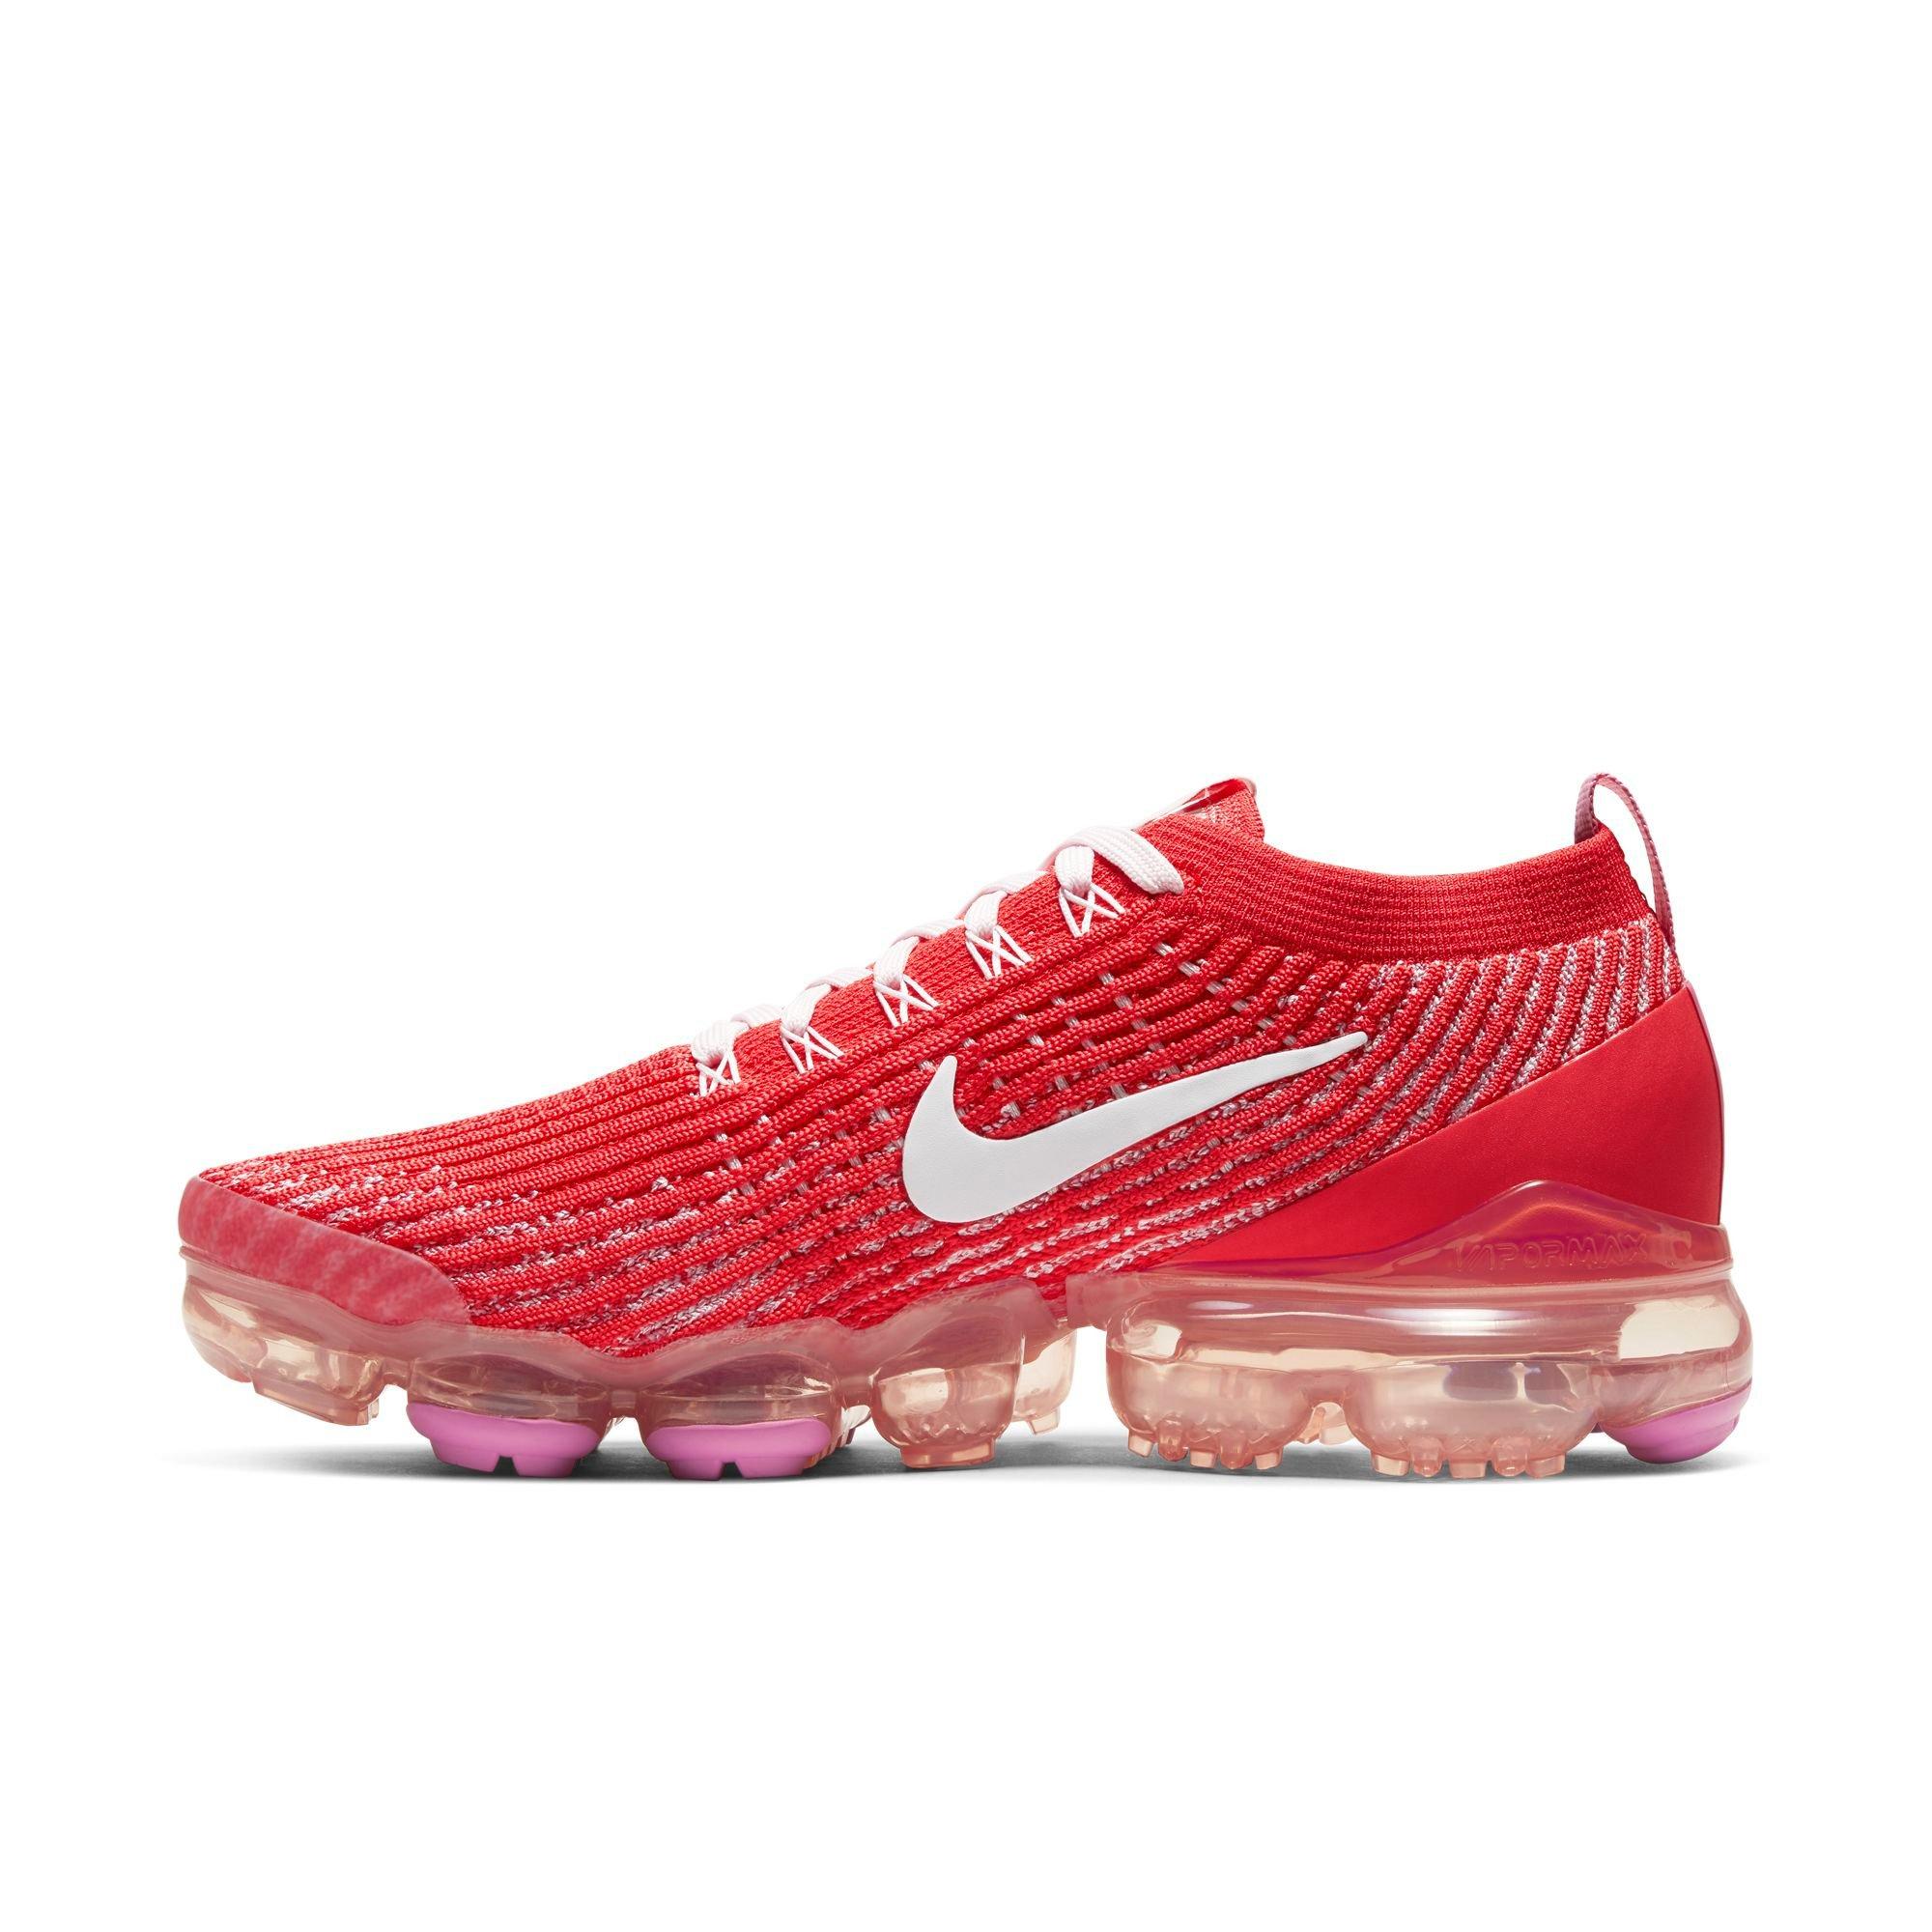 vapormax red and pink